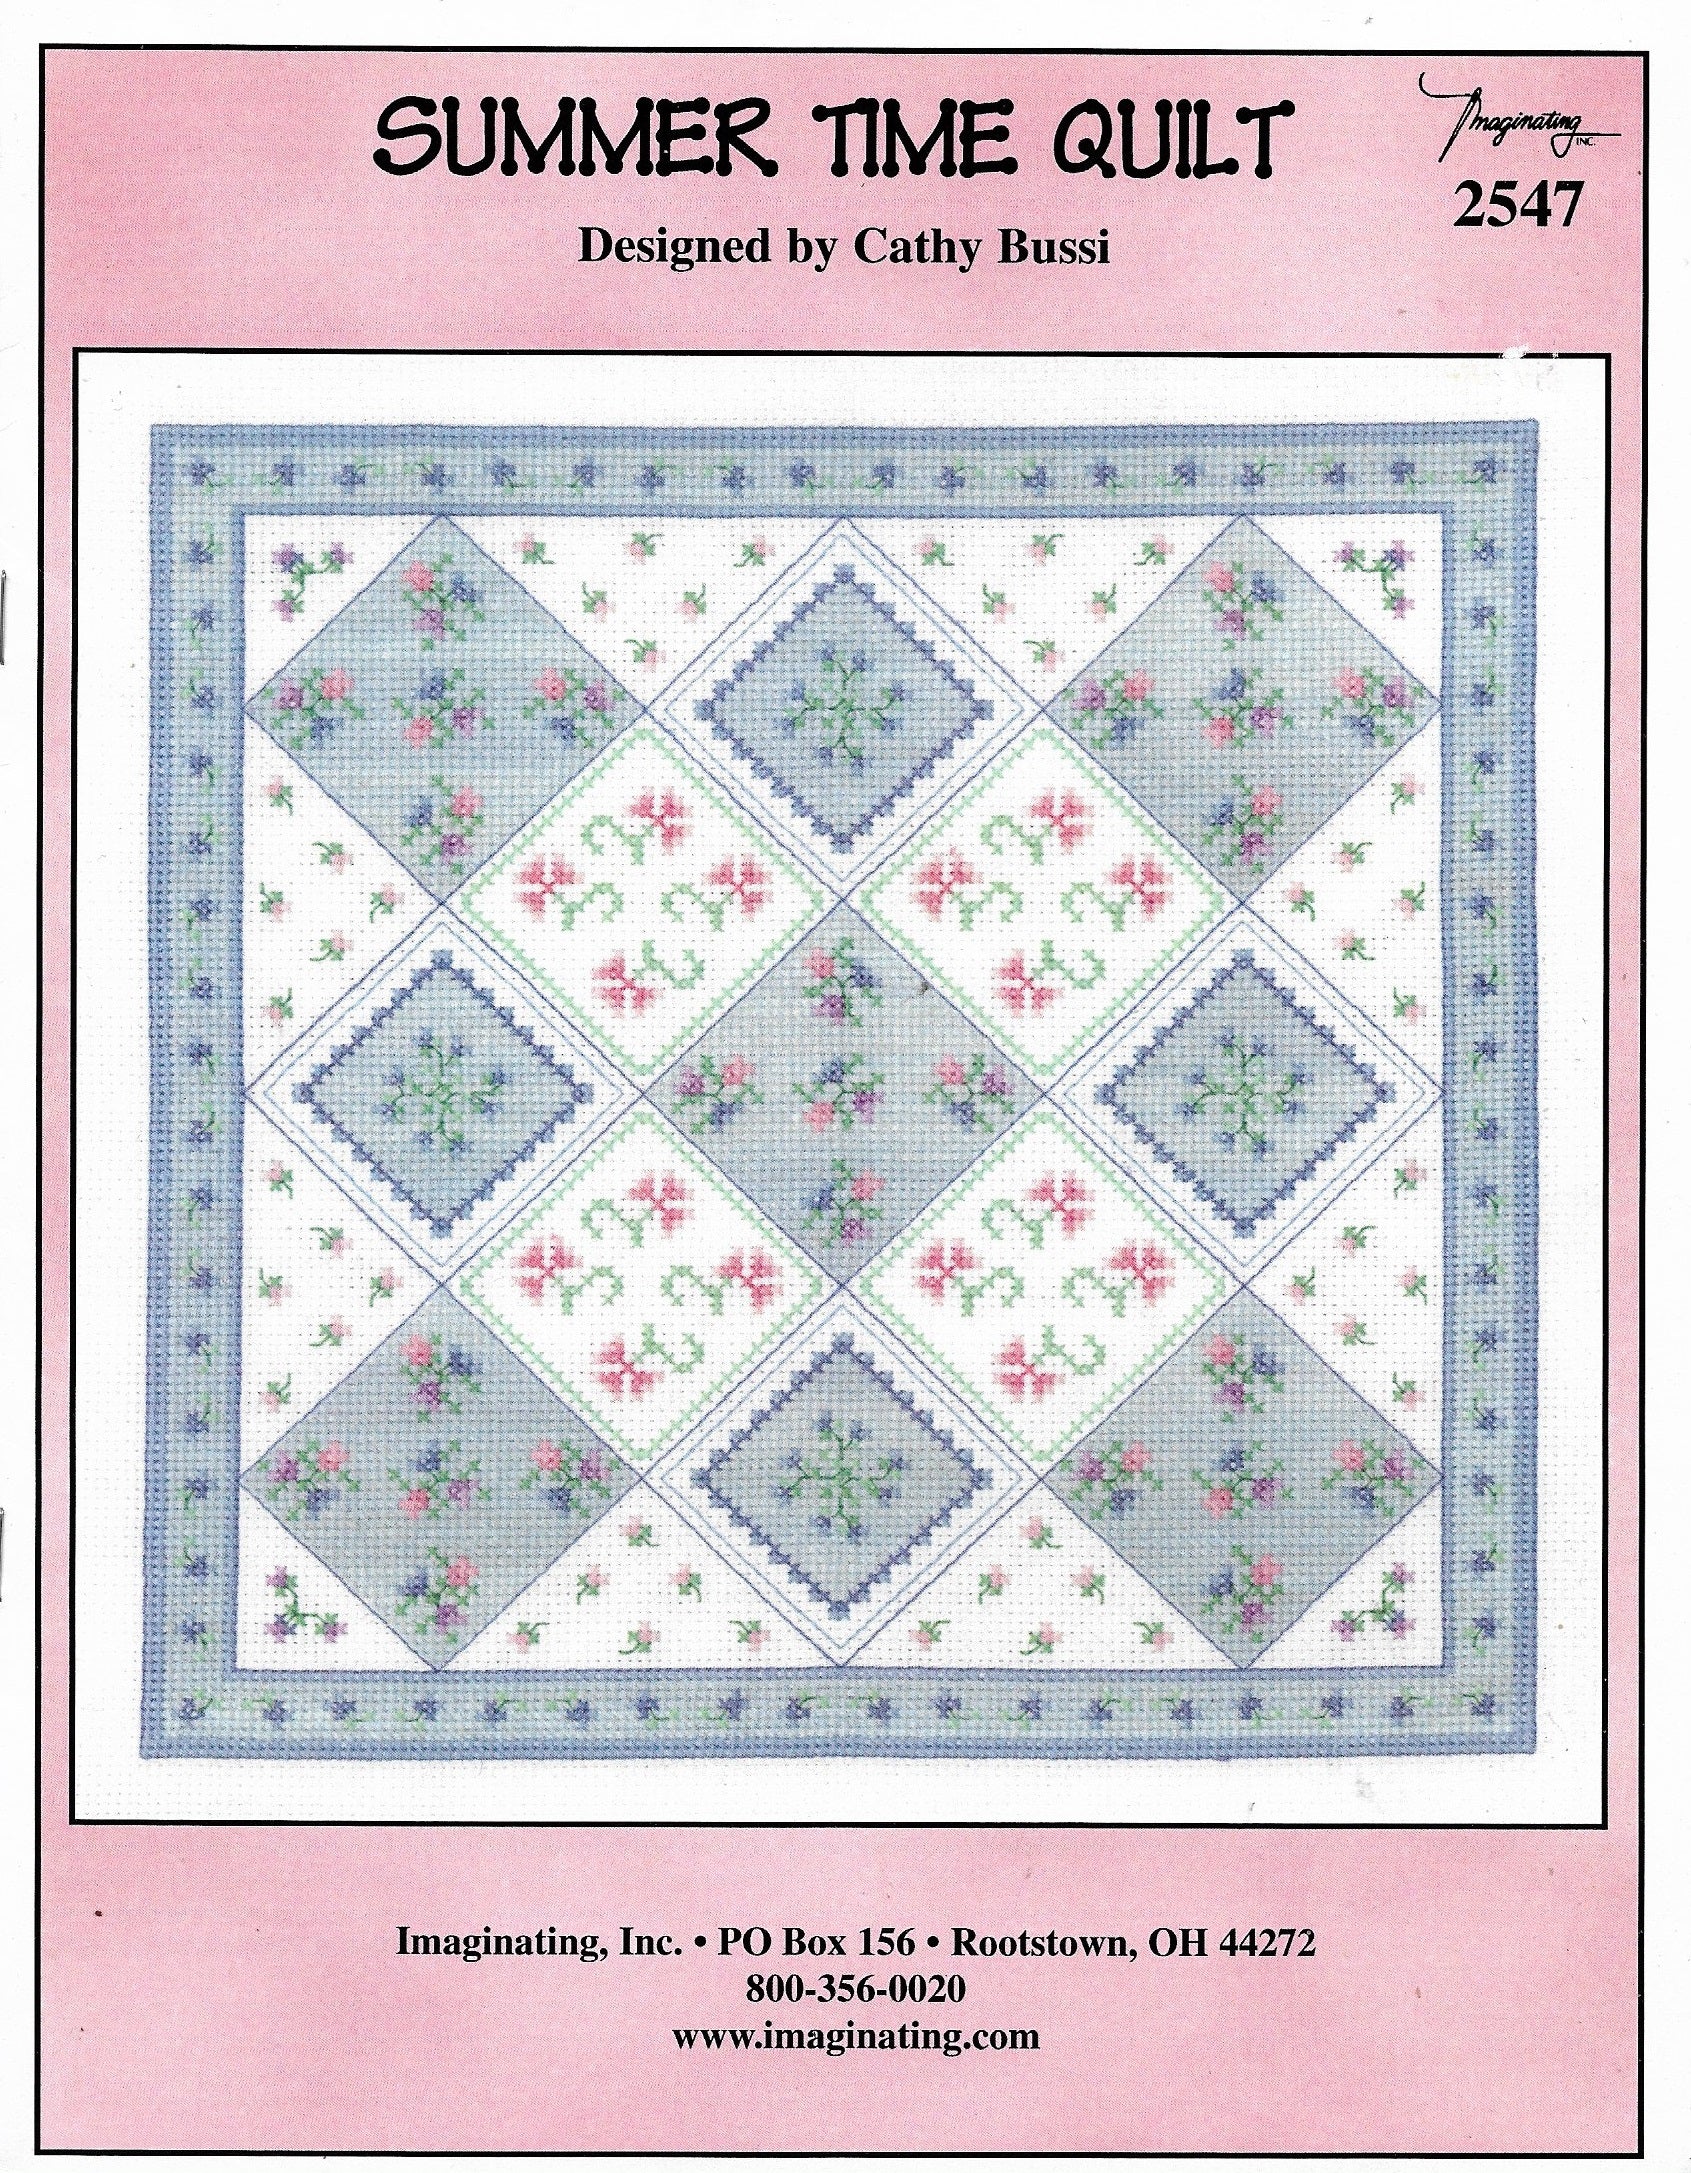 Imaginating Summer Time Quilt 2547 cross stitch pattern